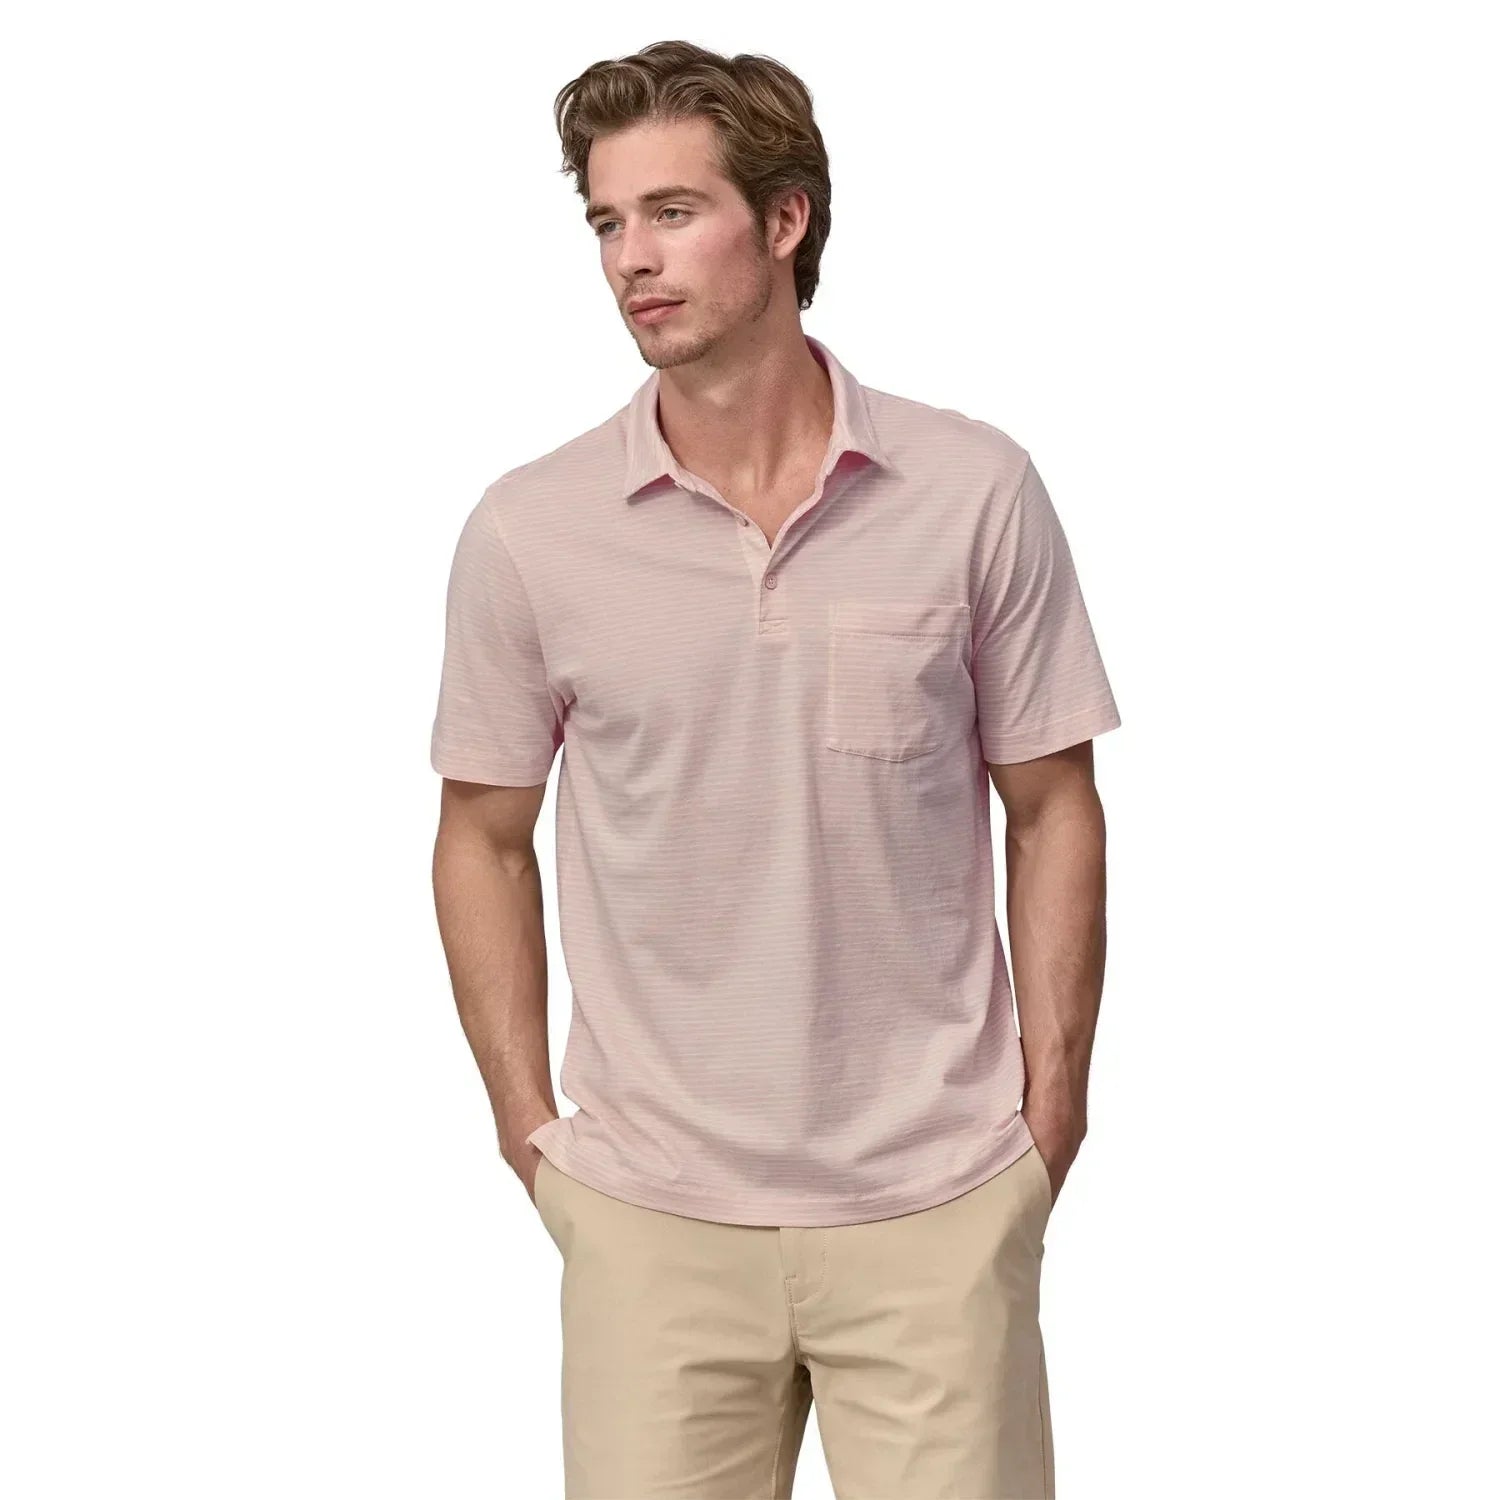 Patagonia 01. MENS APPAREL - MENS SS SHIRTS - MENS SS POLO Men's Daily Polo HILP HIGHLIGHT|LIGHT PLUME GREY